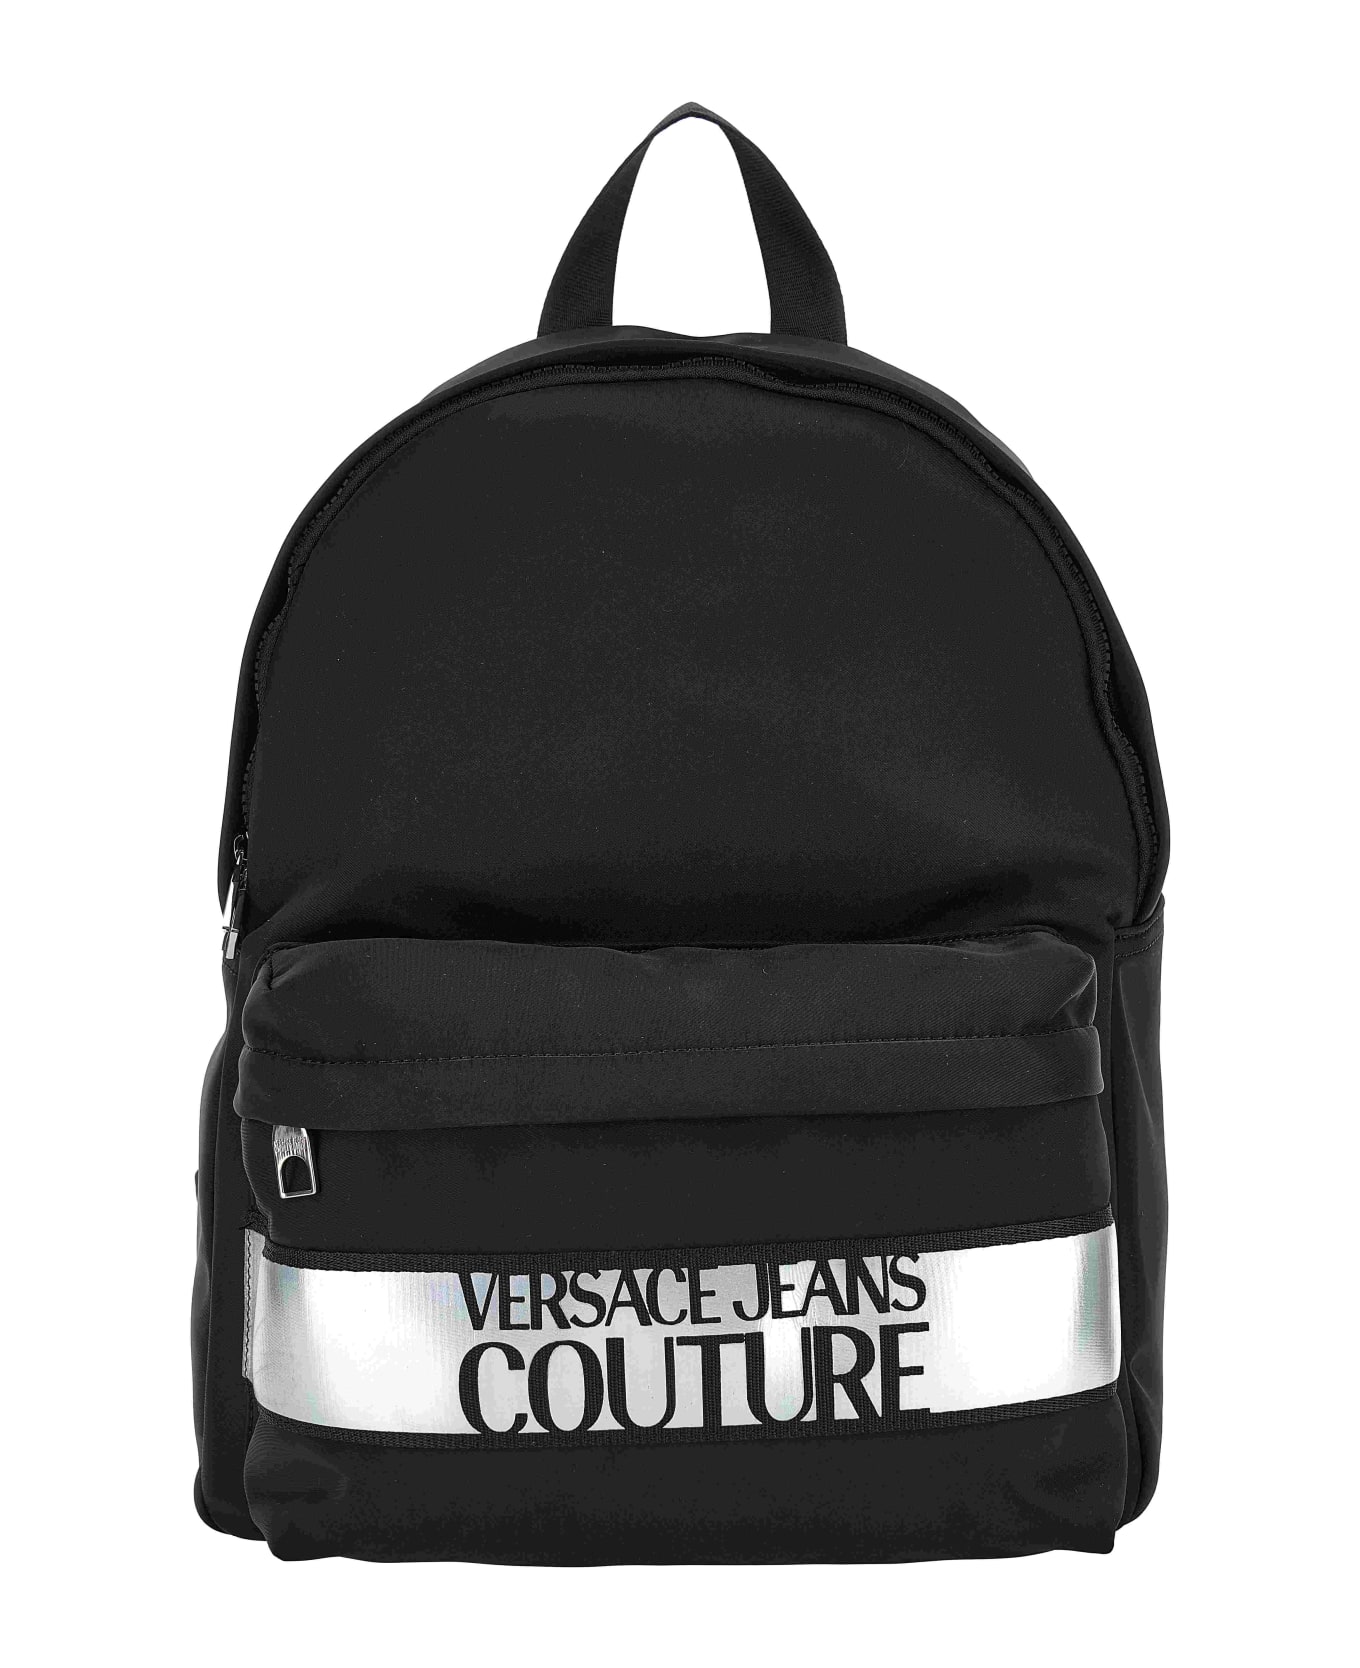 Versace Jeans Couture Range Iconic Logo Sketch 1 Backpack - BLACK/SILVER